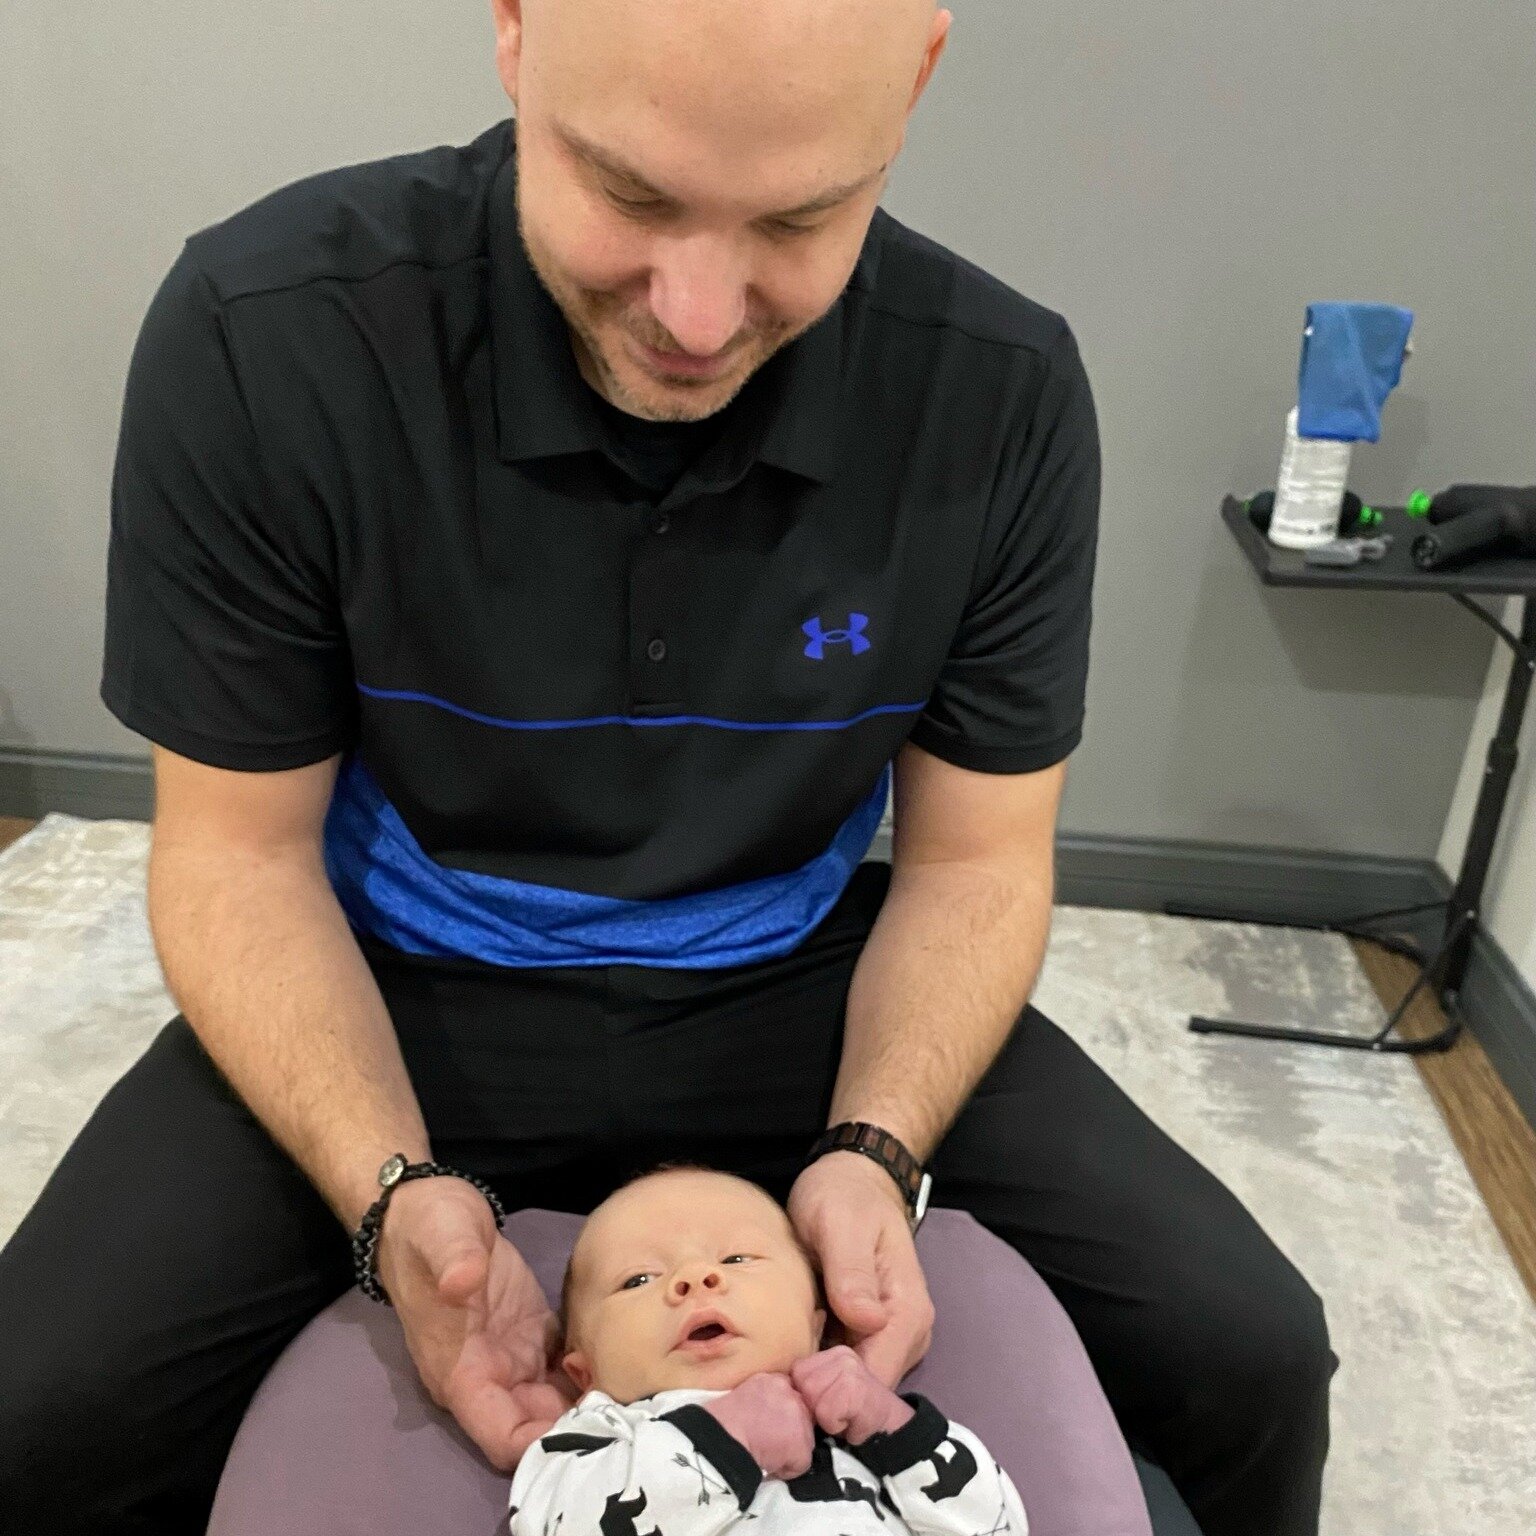 Did you know chiropractic adjustments on babies are super light and can be very effective at helping with:
👉 Colic or purple crying
👉 Acid reflux, or babies who spit up a lot
👉 Constipation and gas
👉 Babies who only want to look or feed one way
?